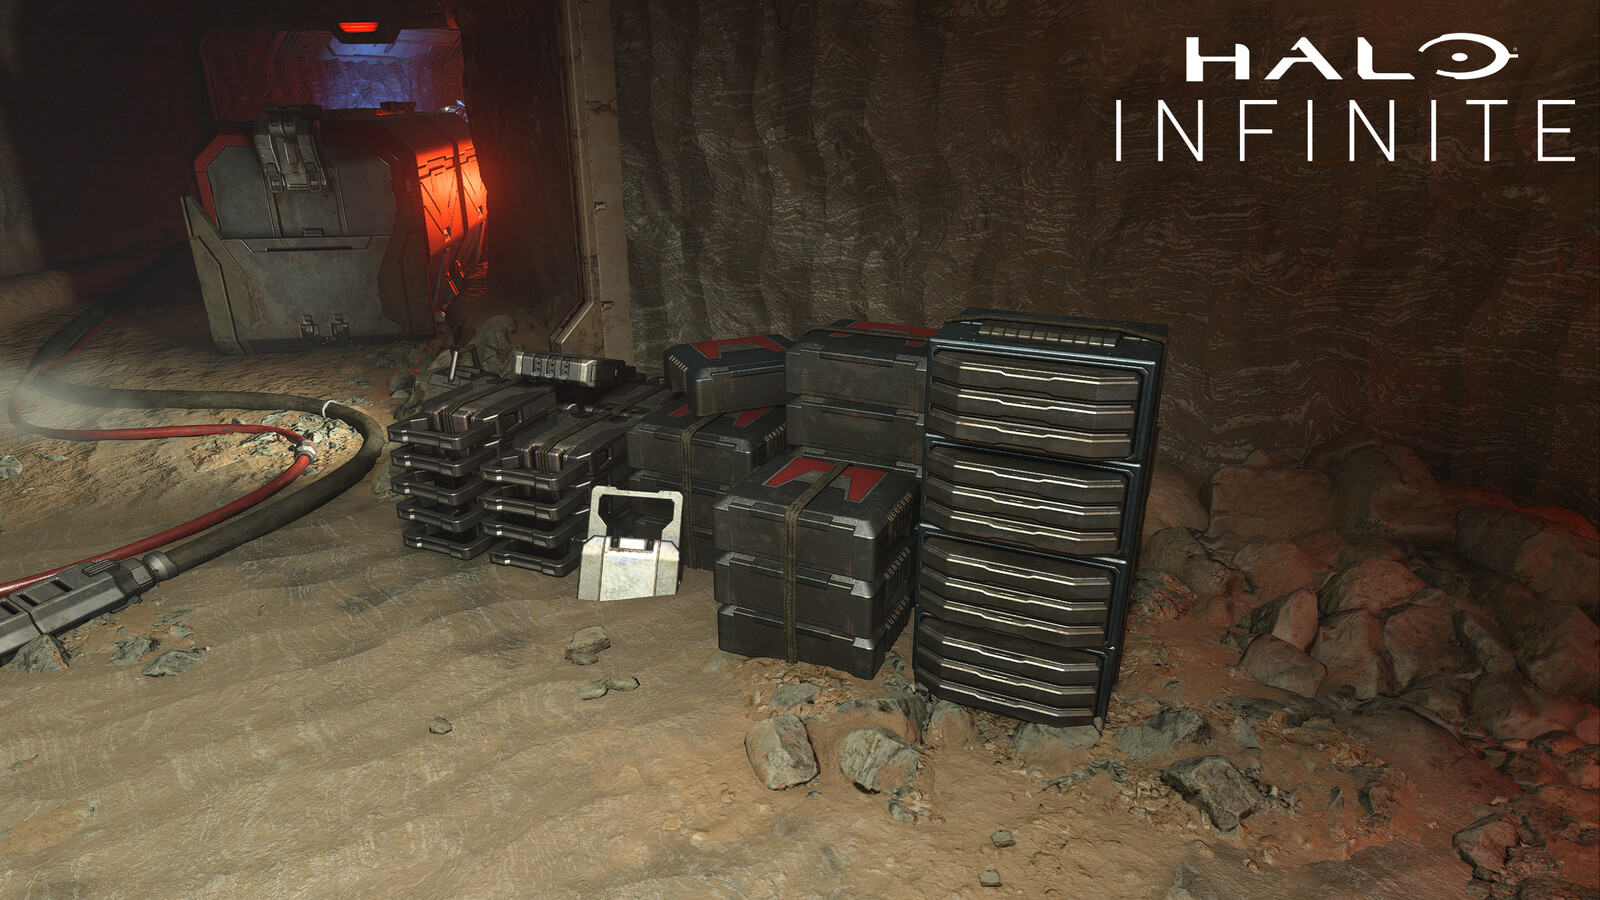 Outsourced banished container assets in game/environment